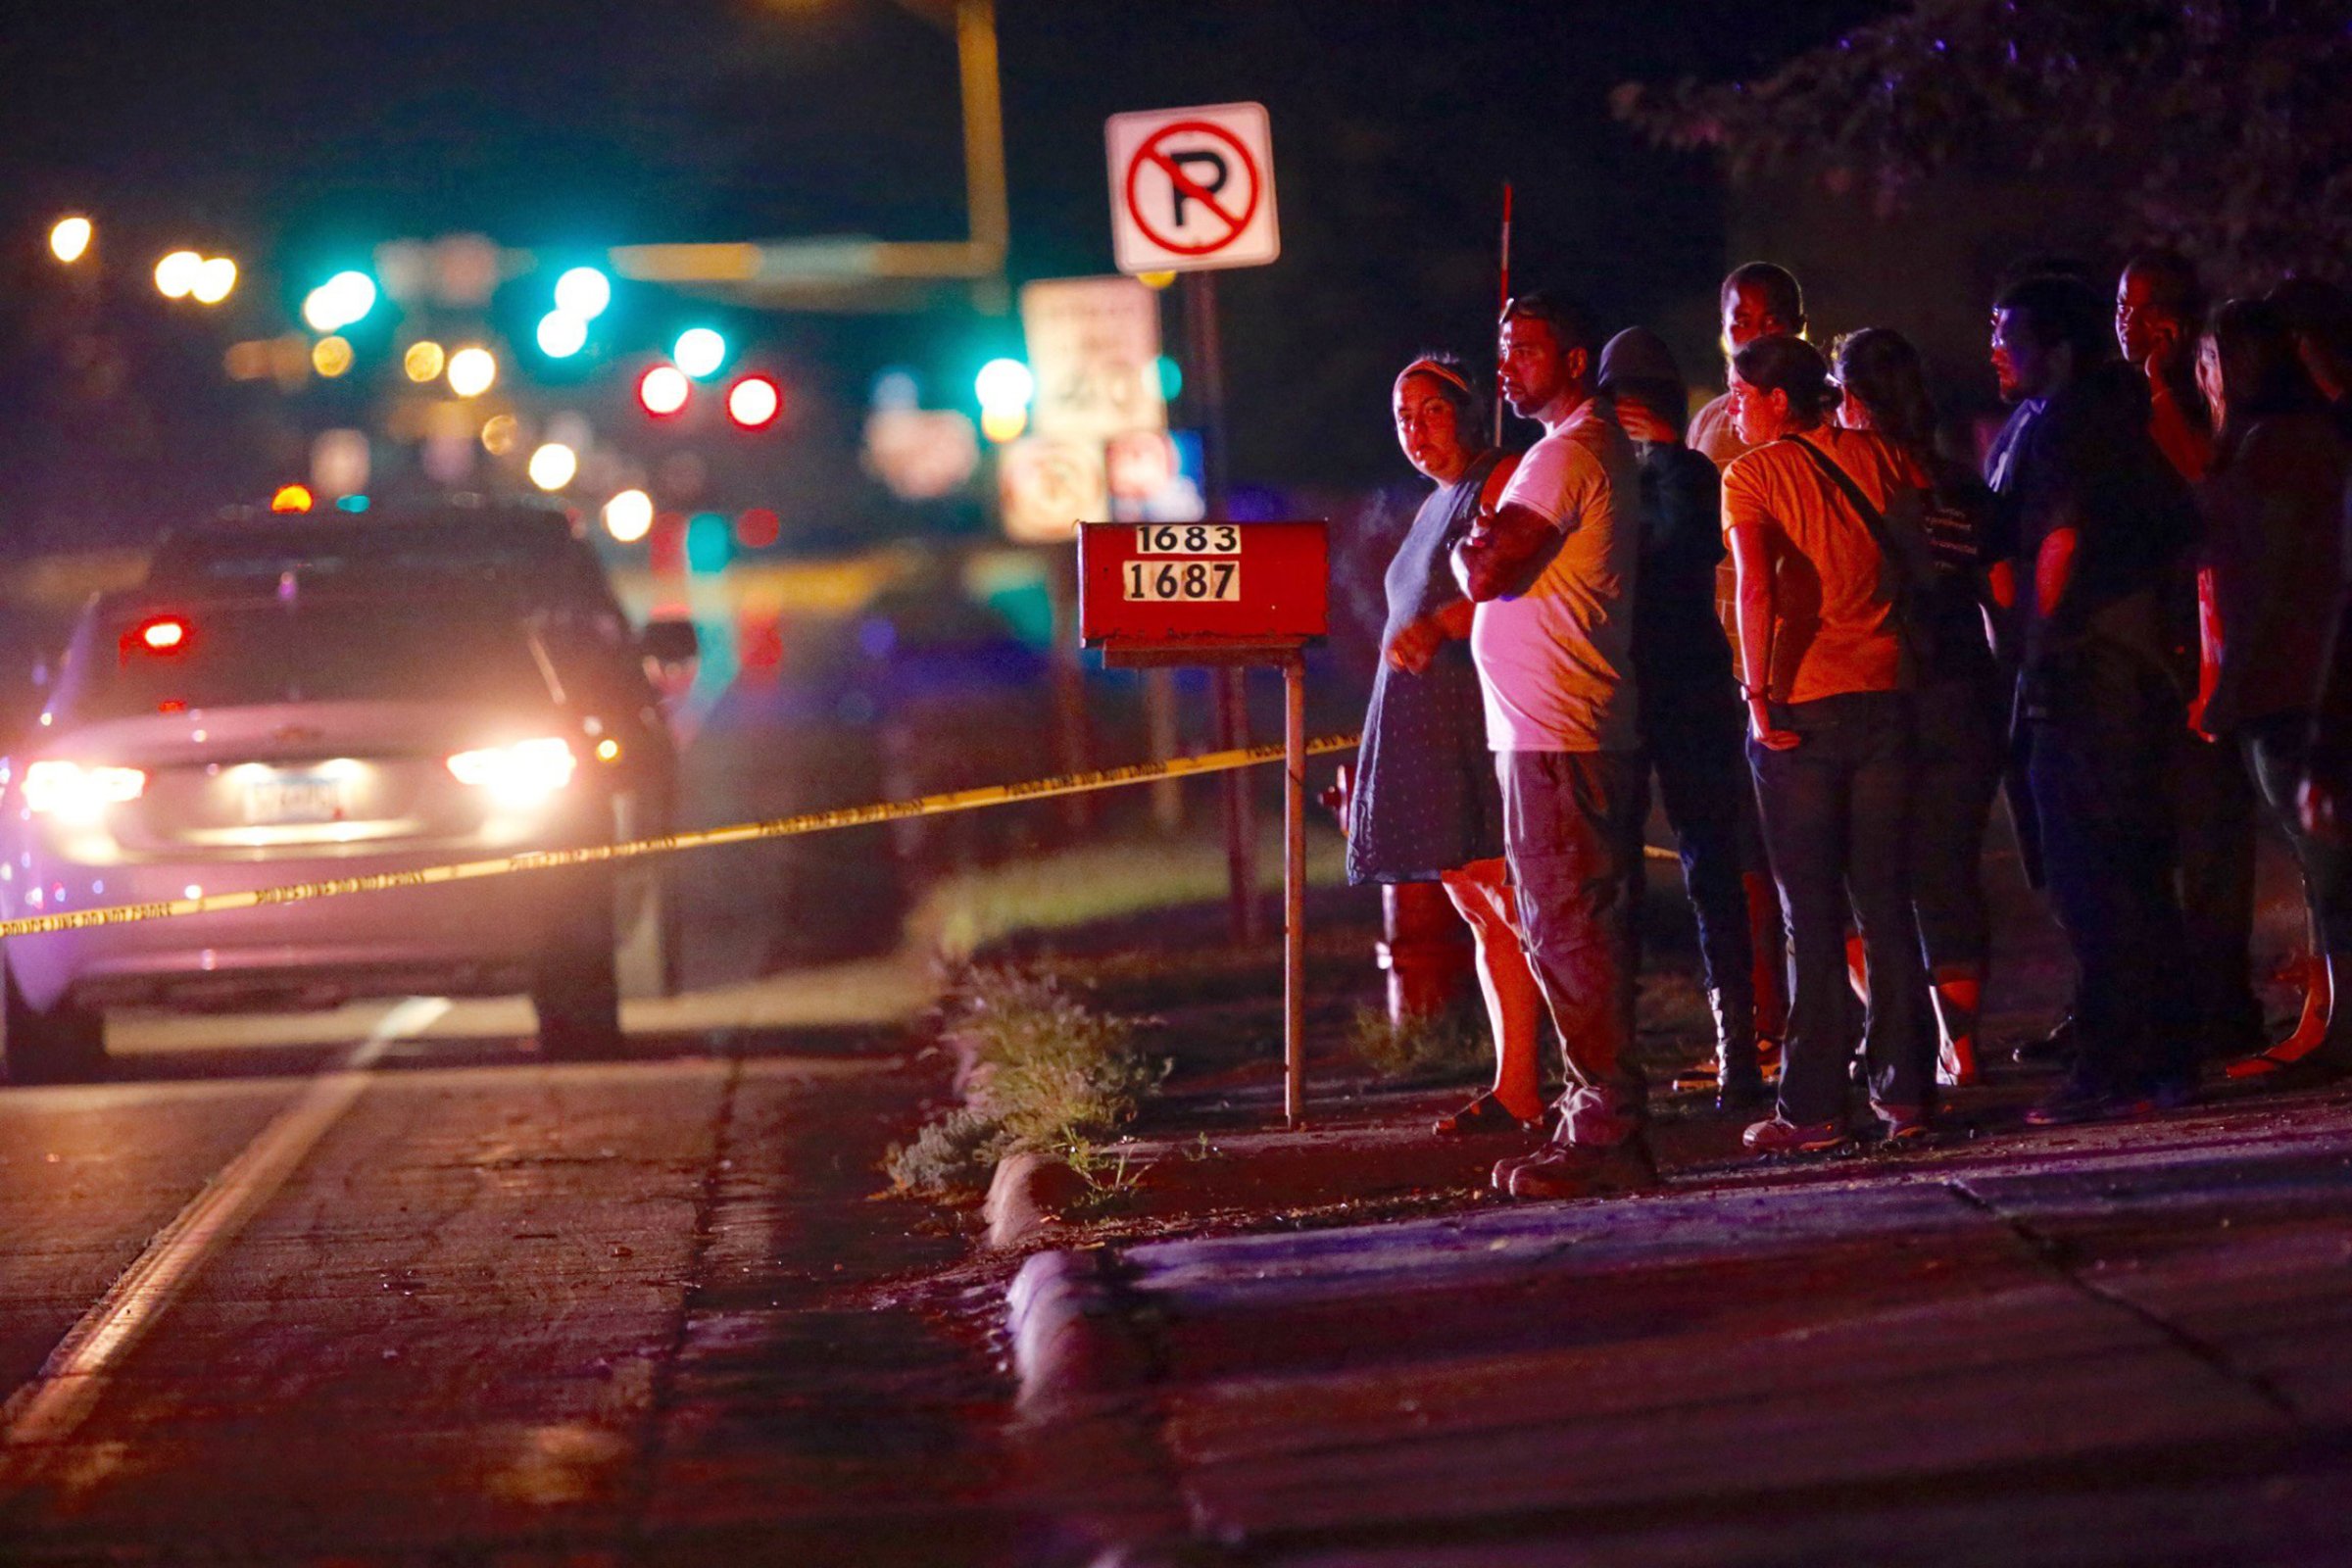 A crowd gathers at the scene of the shooting of Philando Castile by a St. Anthony Police officer in Falcon Heights, Minn. on July 6, 2016.